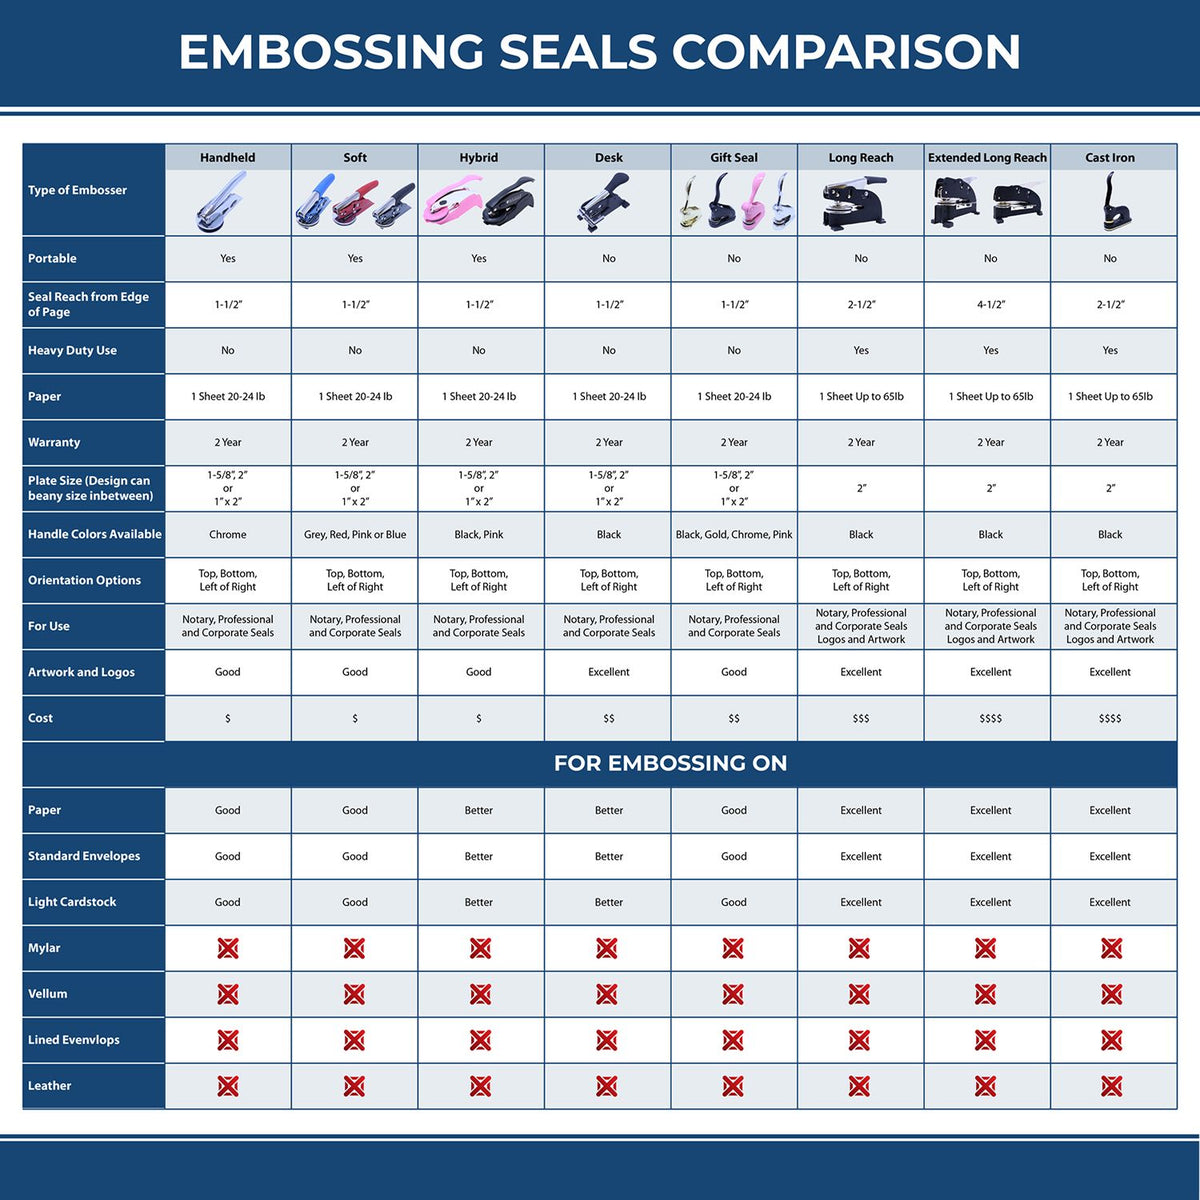 A comparison chart for the different types of mount models available for the Soft Pocket Missouri Landscape Architect Embosser.